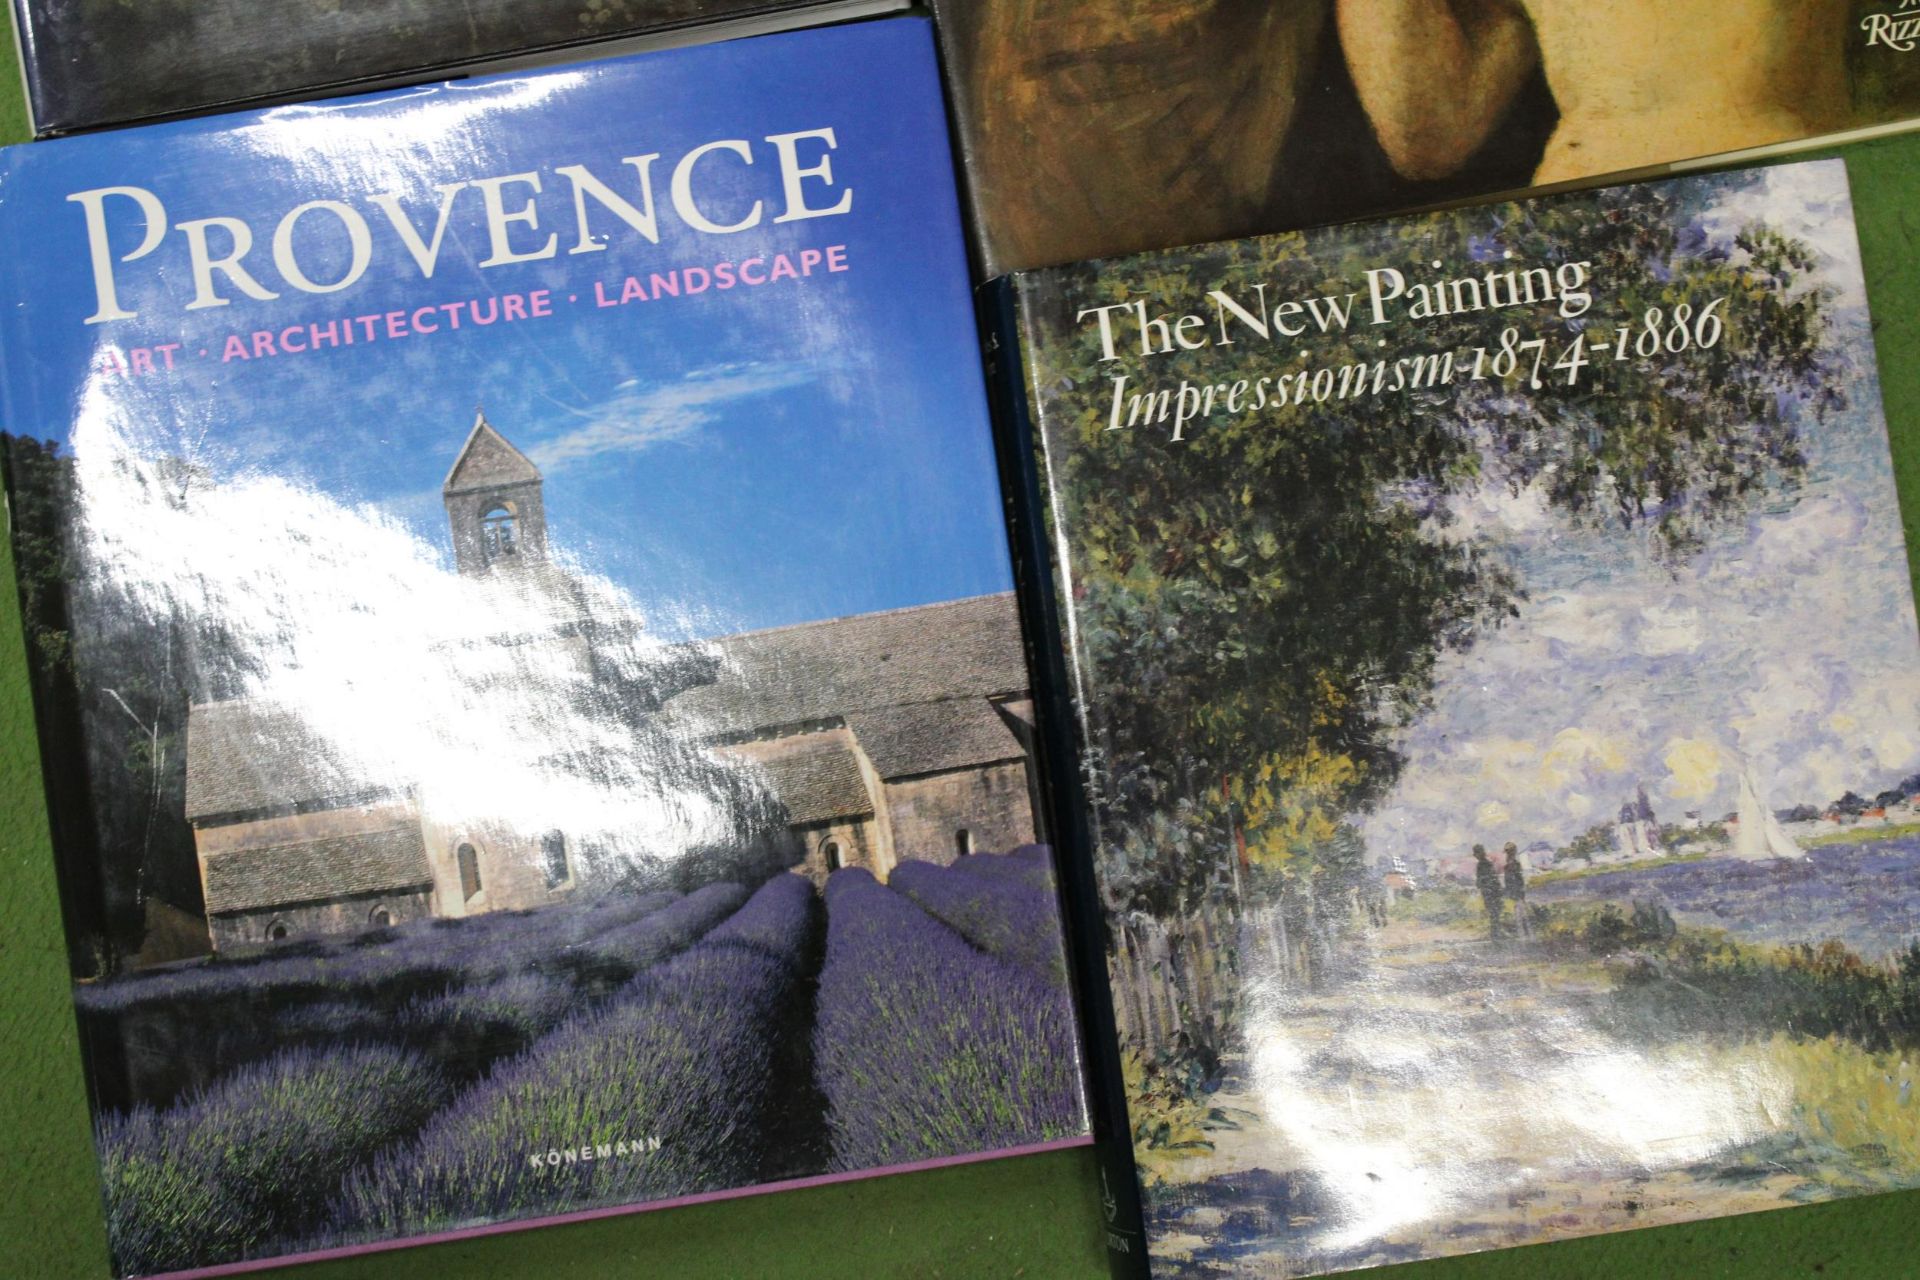 FOUR ART THEMED HARDBACK BOOKS TO INCLUDE IMPRESSIONISM 1874-1866, COROT IN ITALY, PROVENCE, ART, - Image 4 of 5